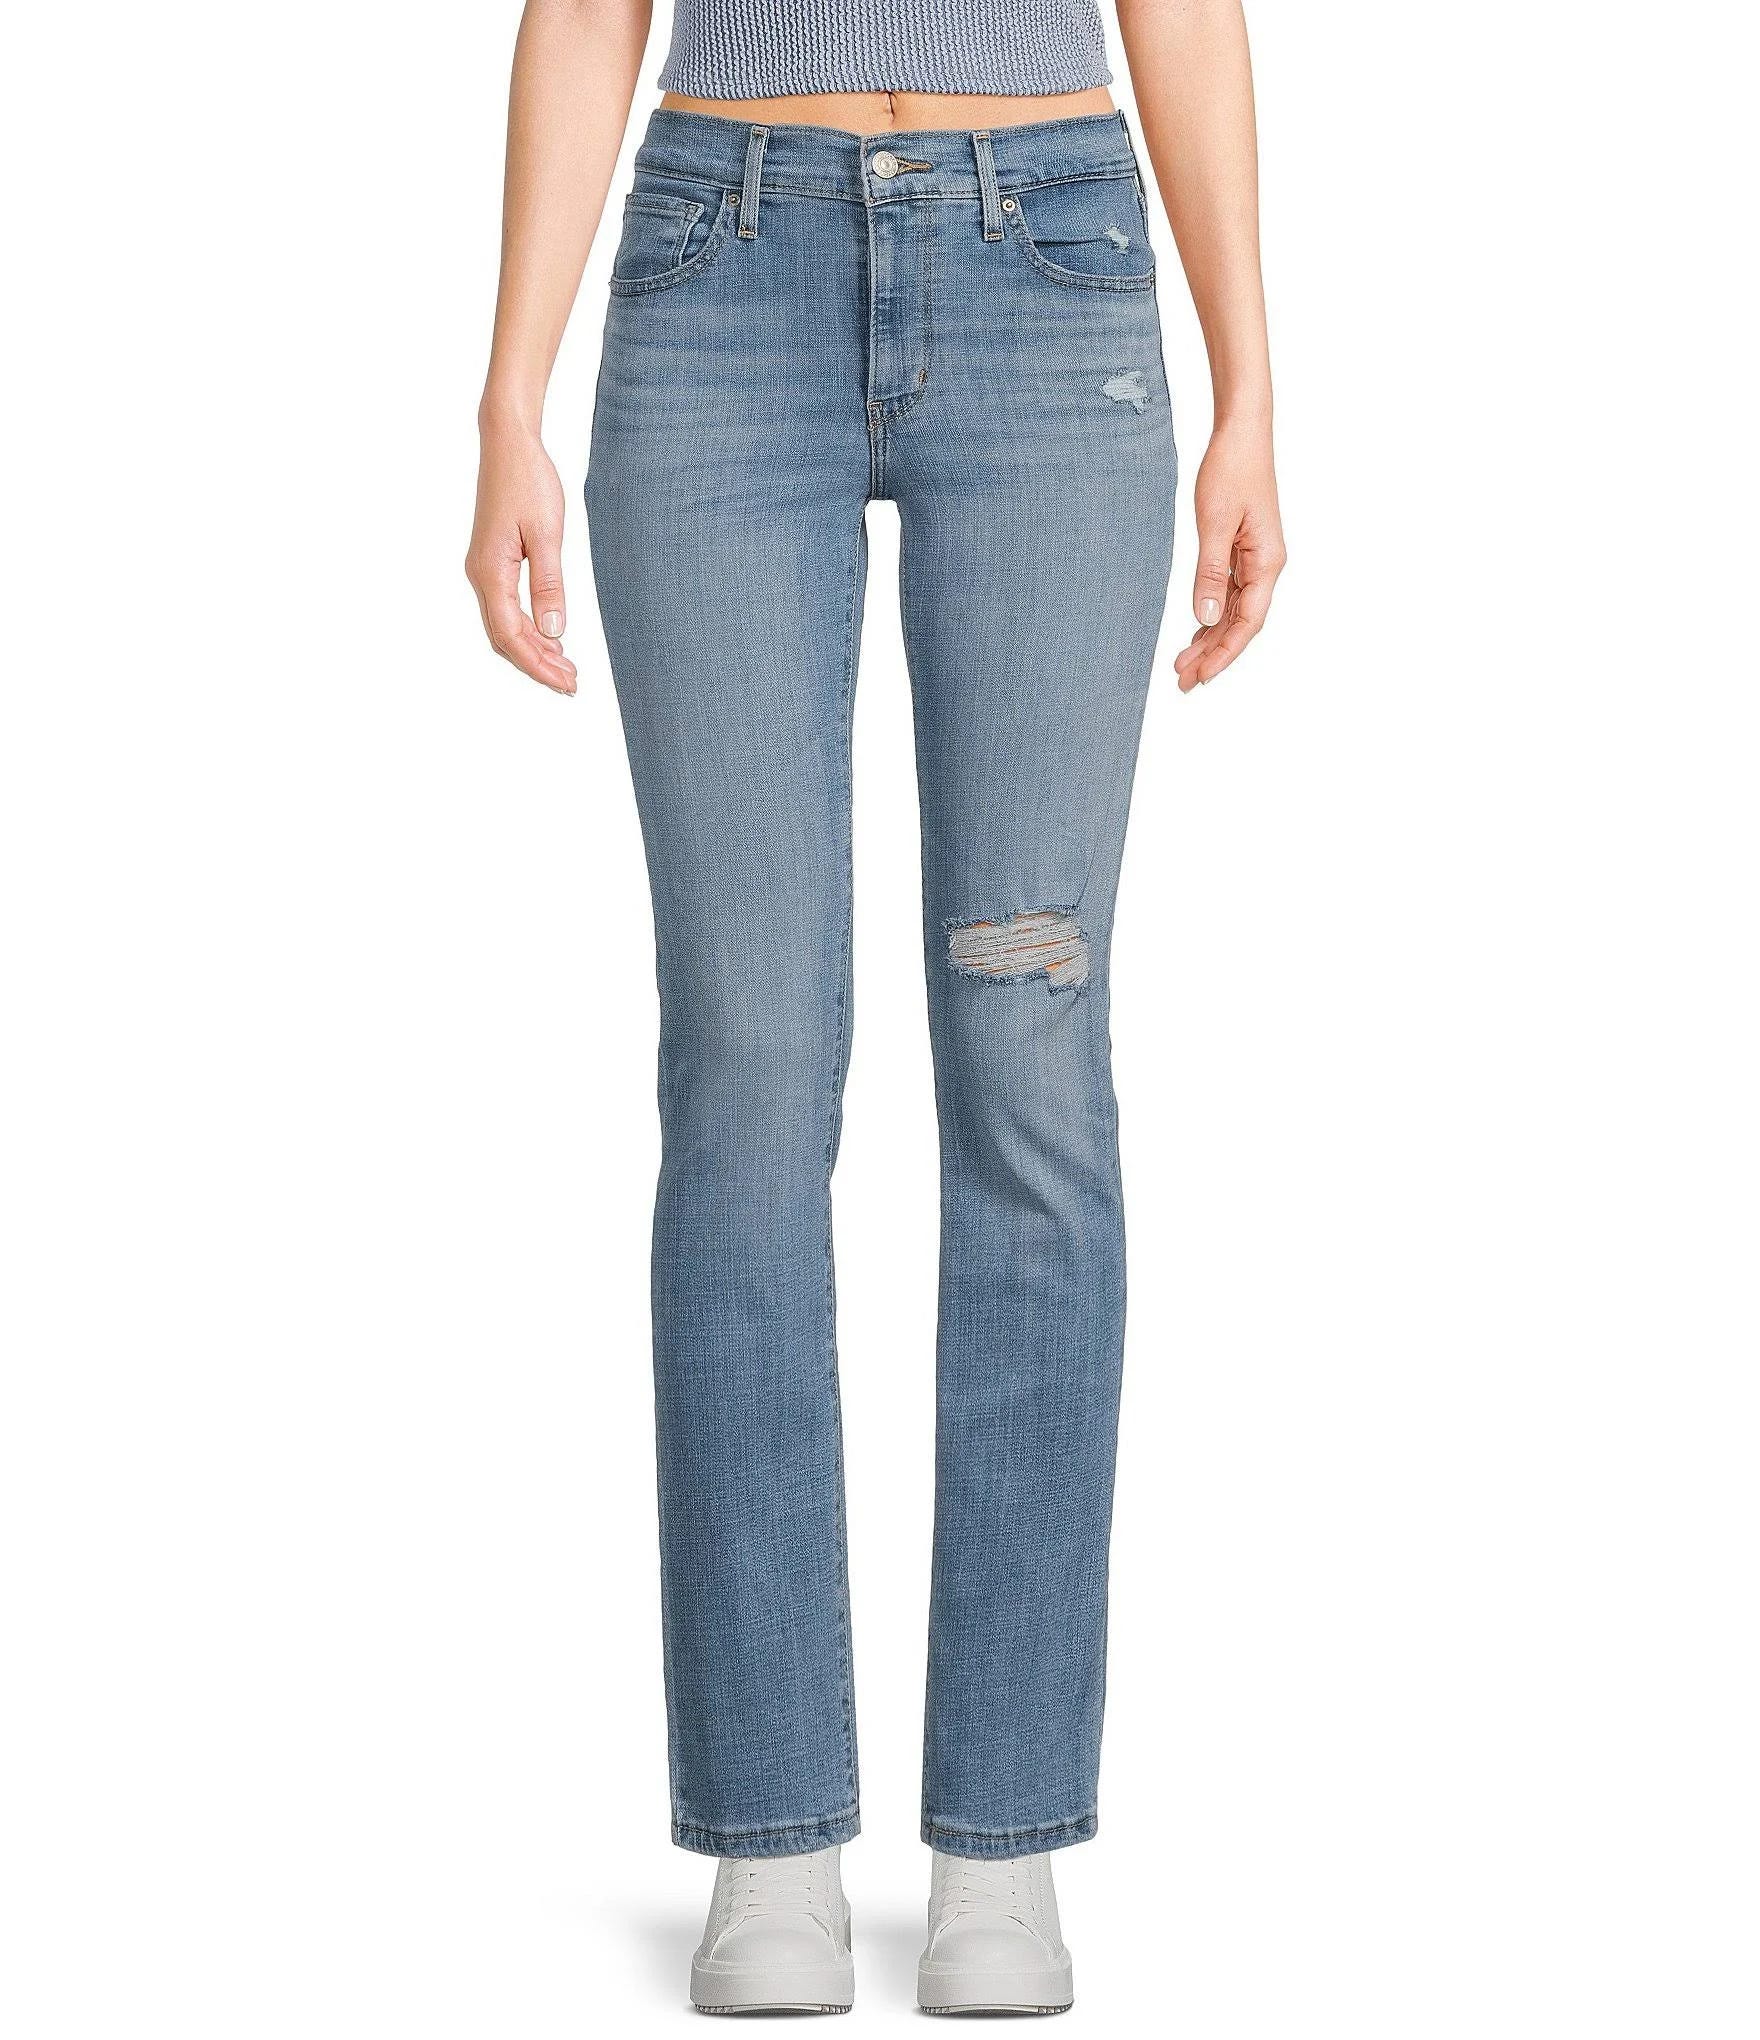 Comfortable High-Rise Straight Jeans for a Flattering Fit | Image